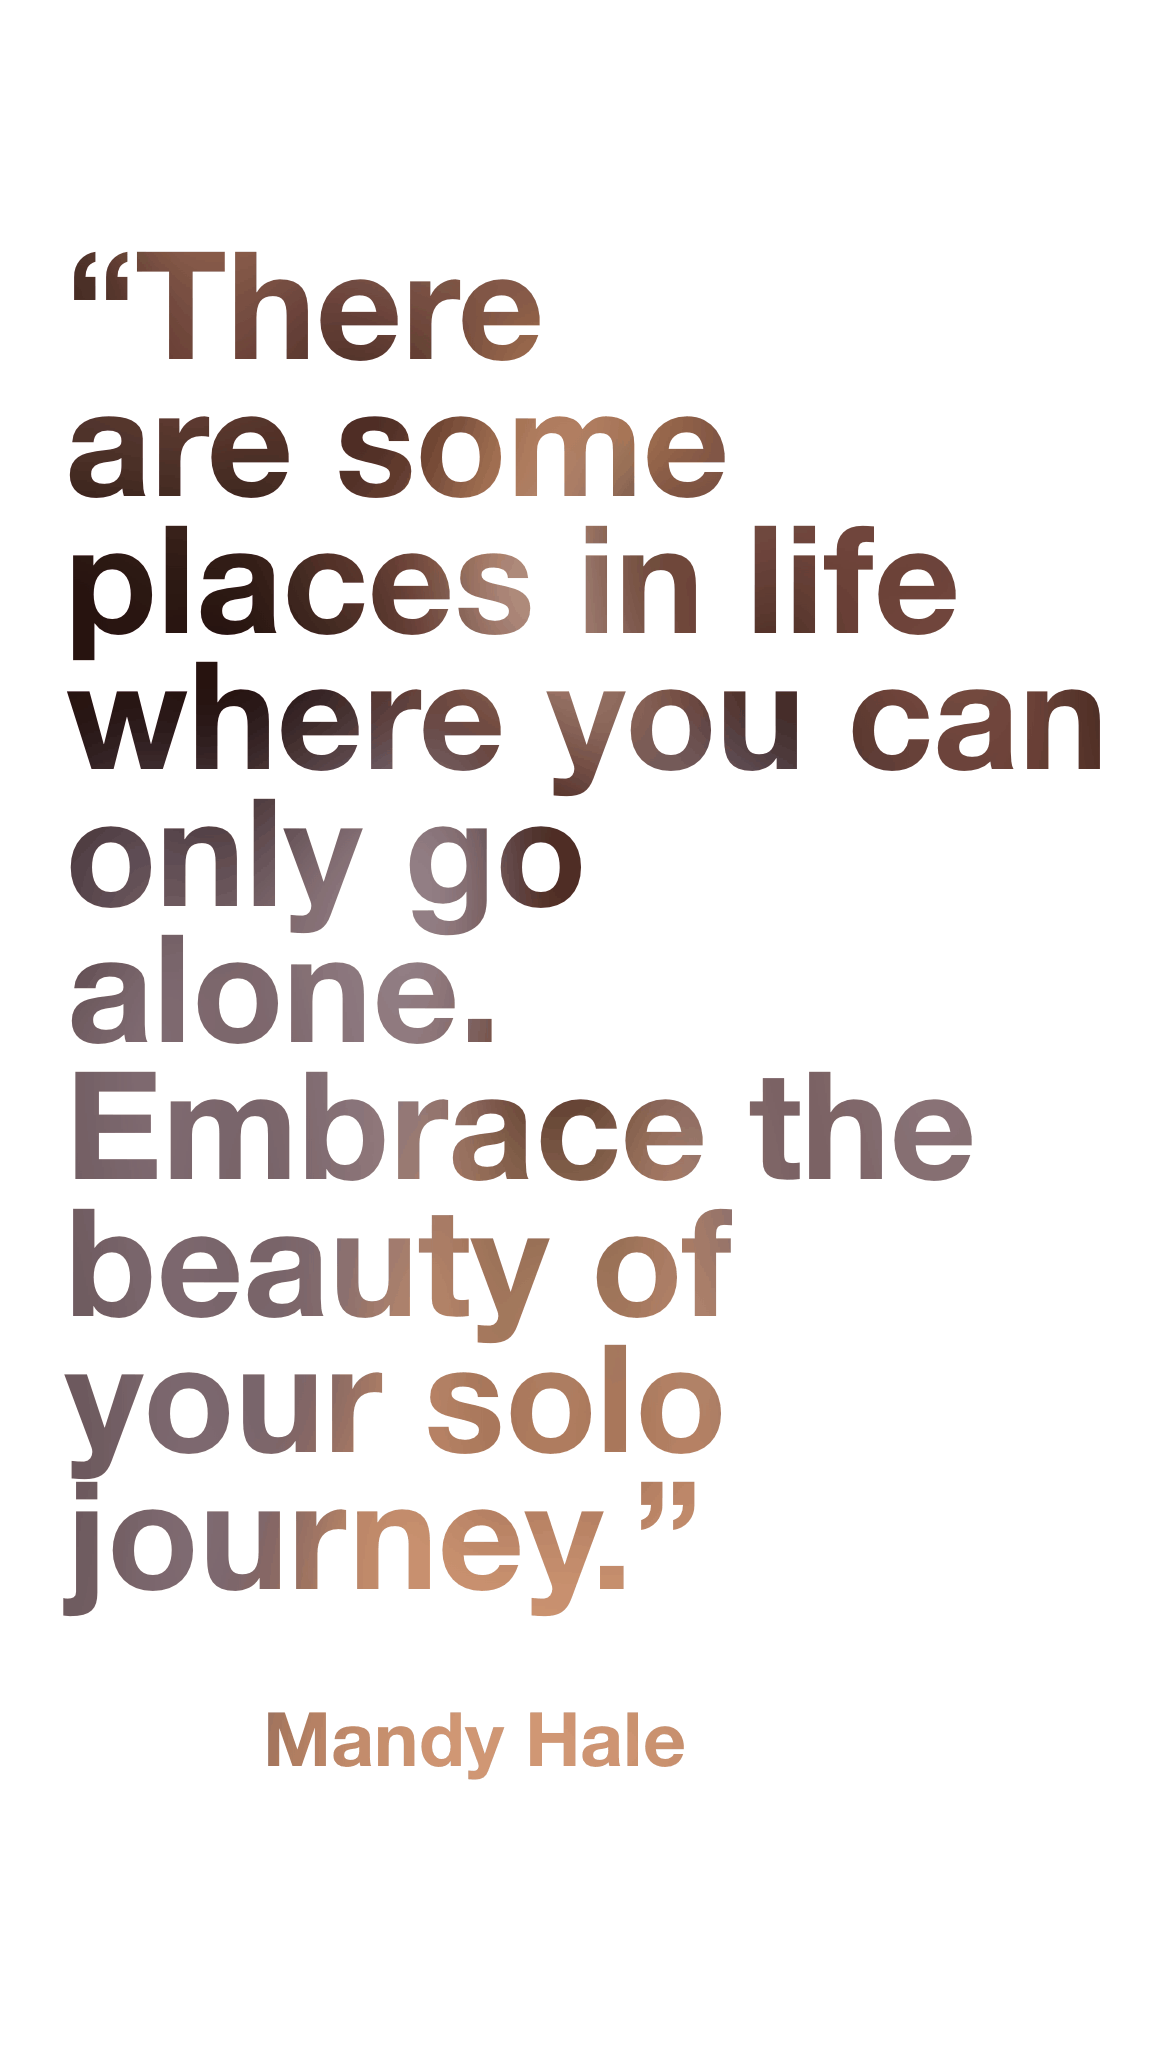 41 Inspiring Quotes for Travelling Alone - Your Solo Travel Quote Boost